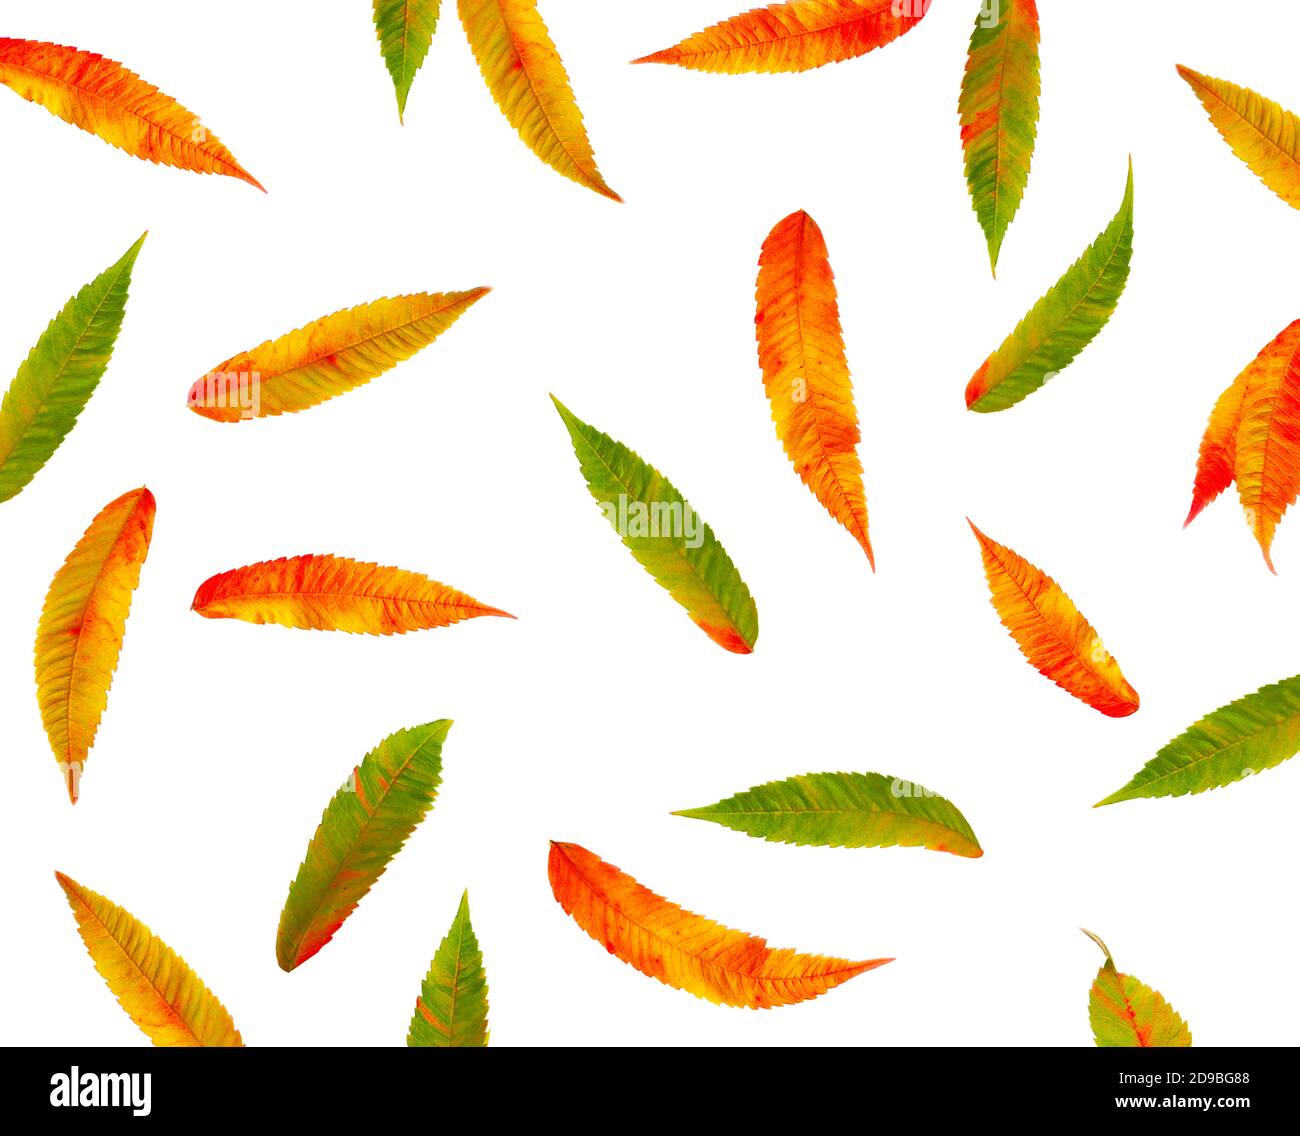 Autumn leaves on a white background Stock Photo